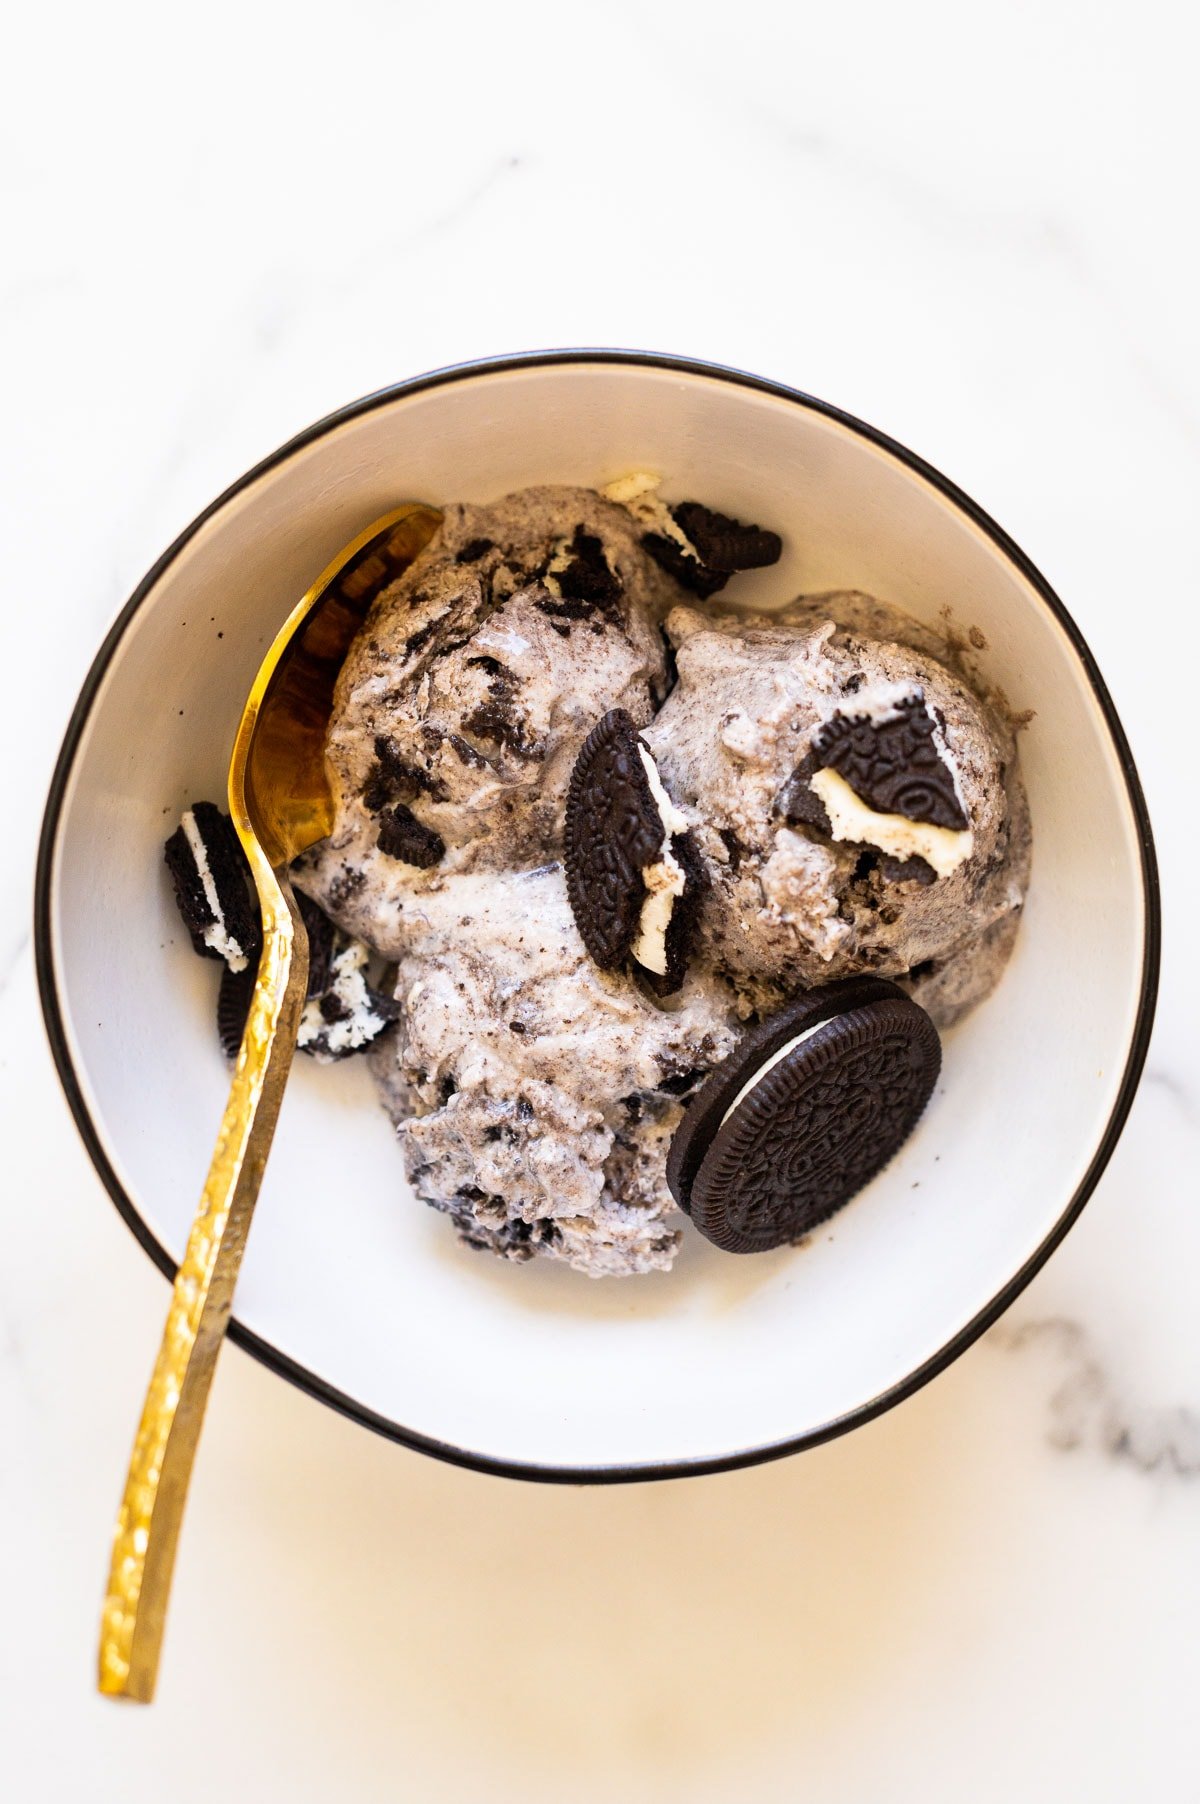 Cookies and cream cottage cheese ice cream served with cookies in a bowl.